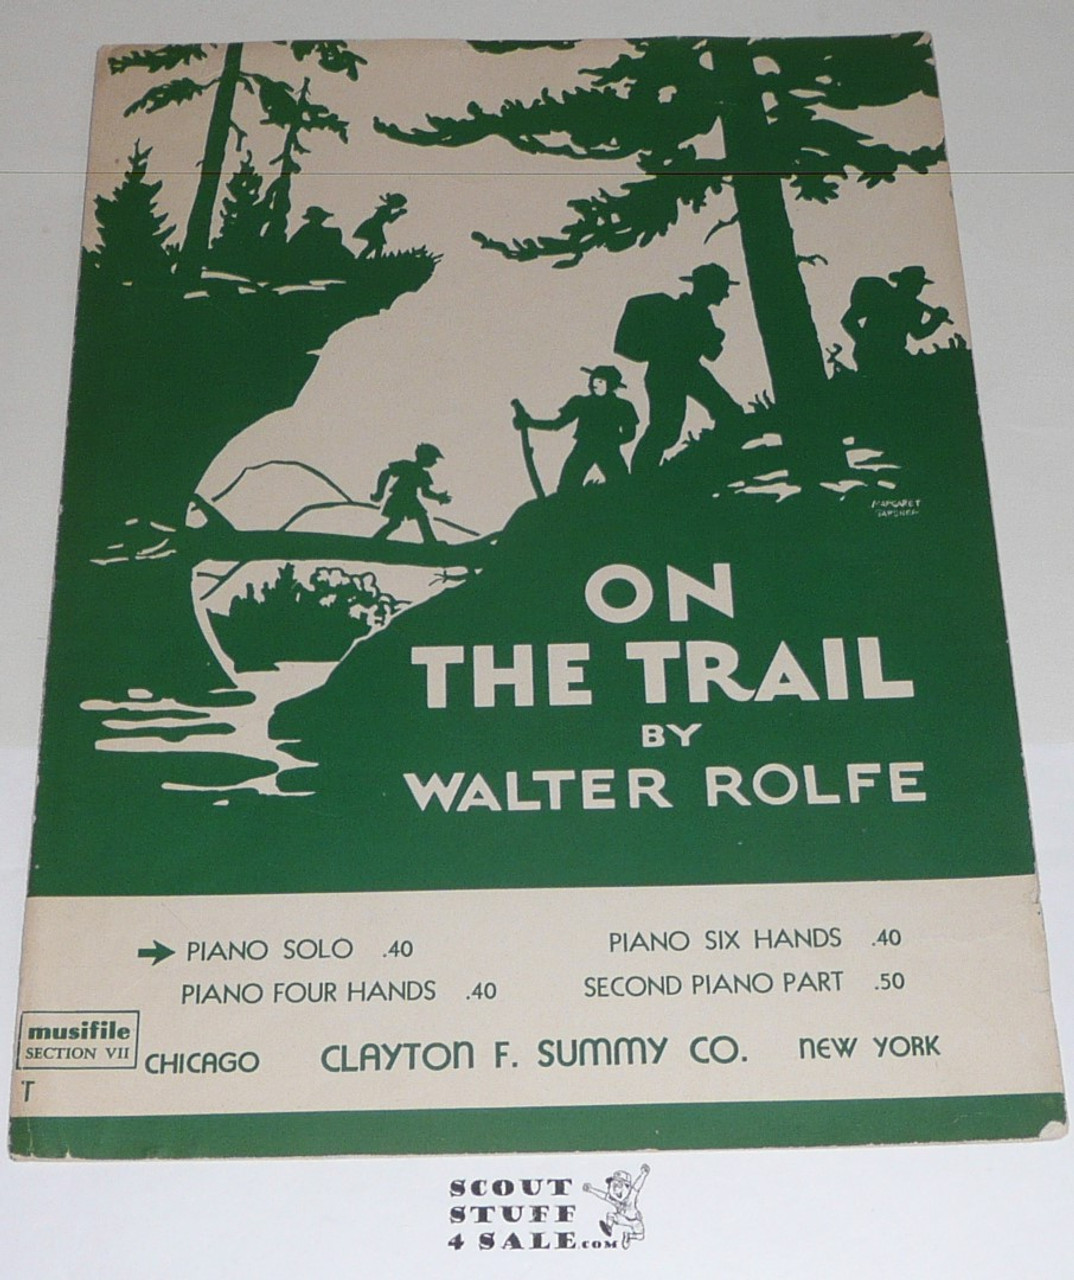 1933 On the Trail Sheet Music, by Walter Rolfe